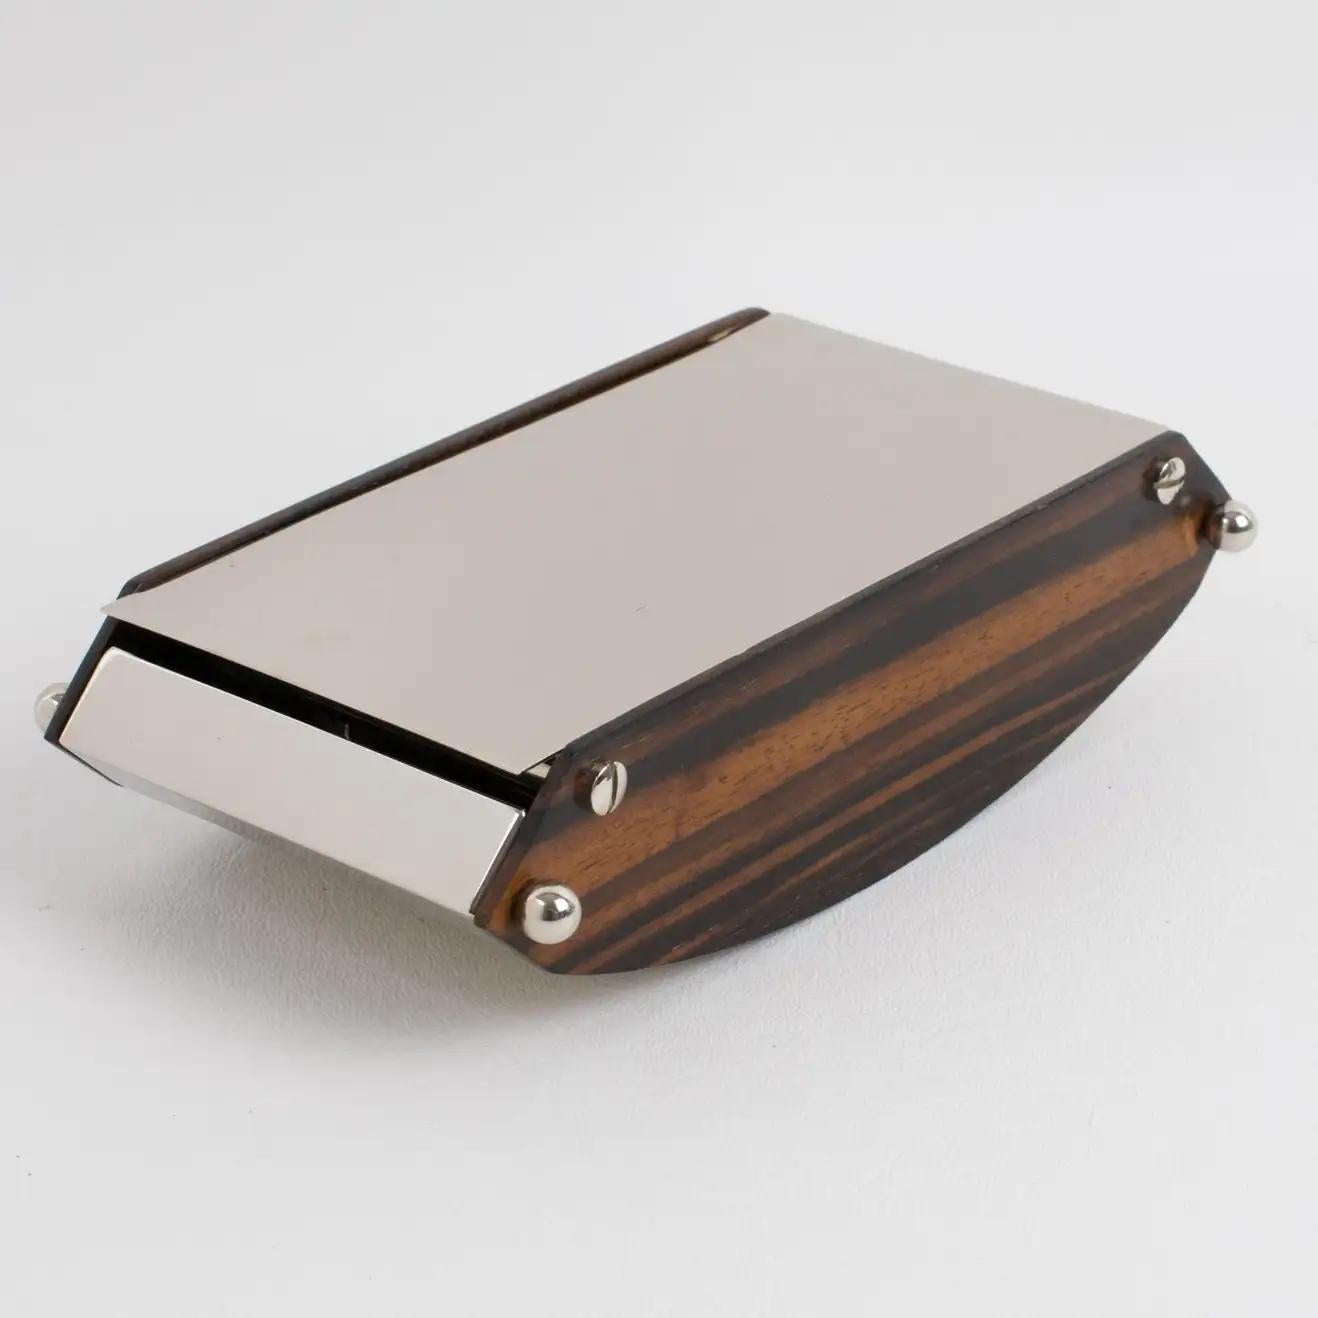 Maison Desny Style Art Deco Box Macassar Wood and Chrome, France 1930s For Sale 2